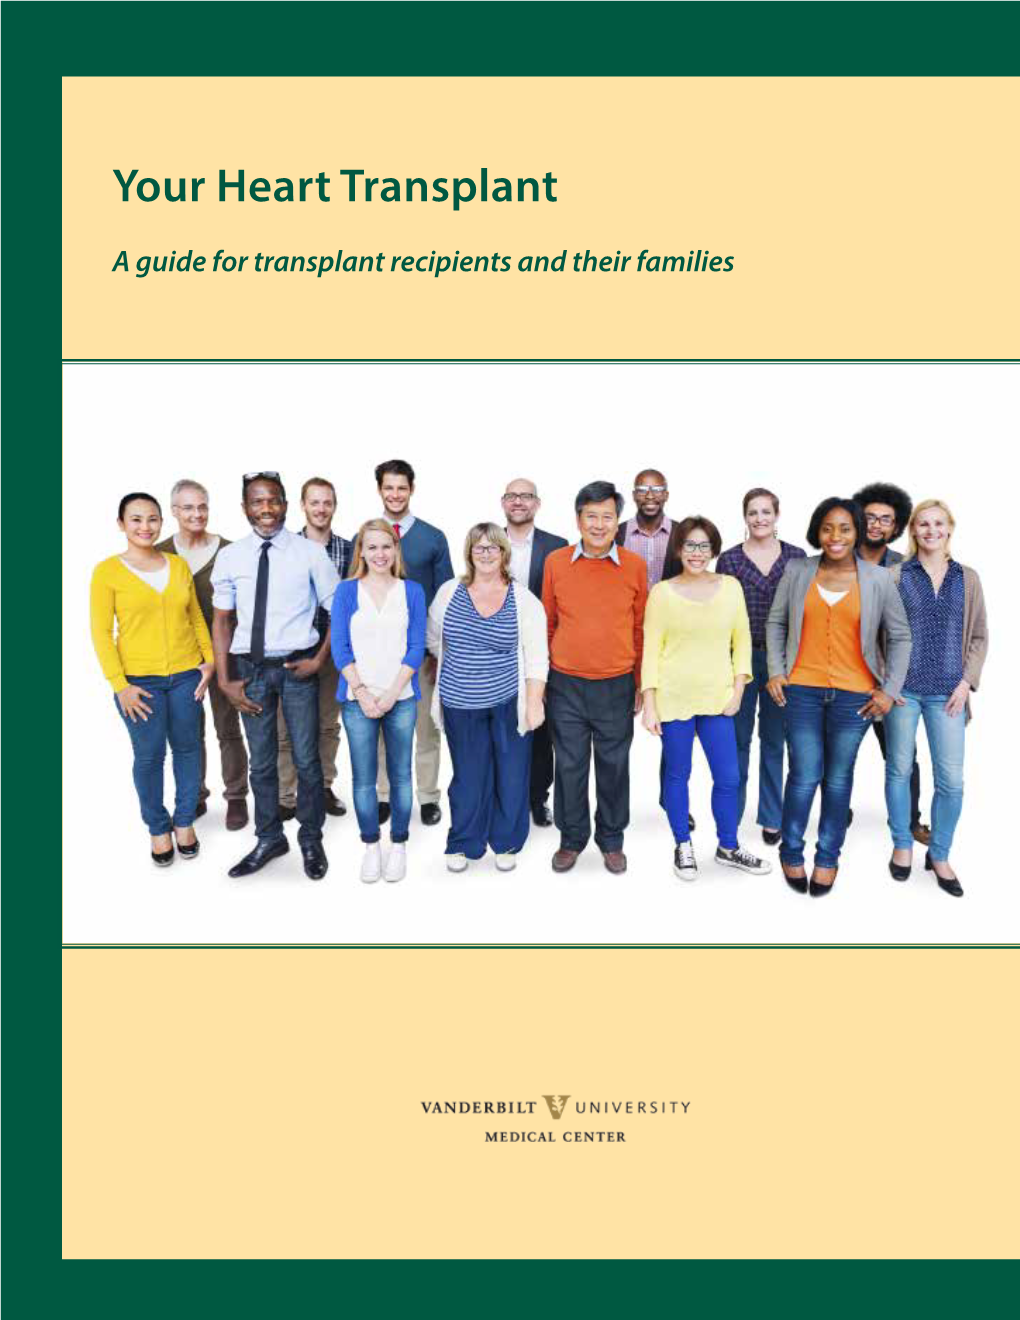 Your Heart Transplant